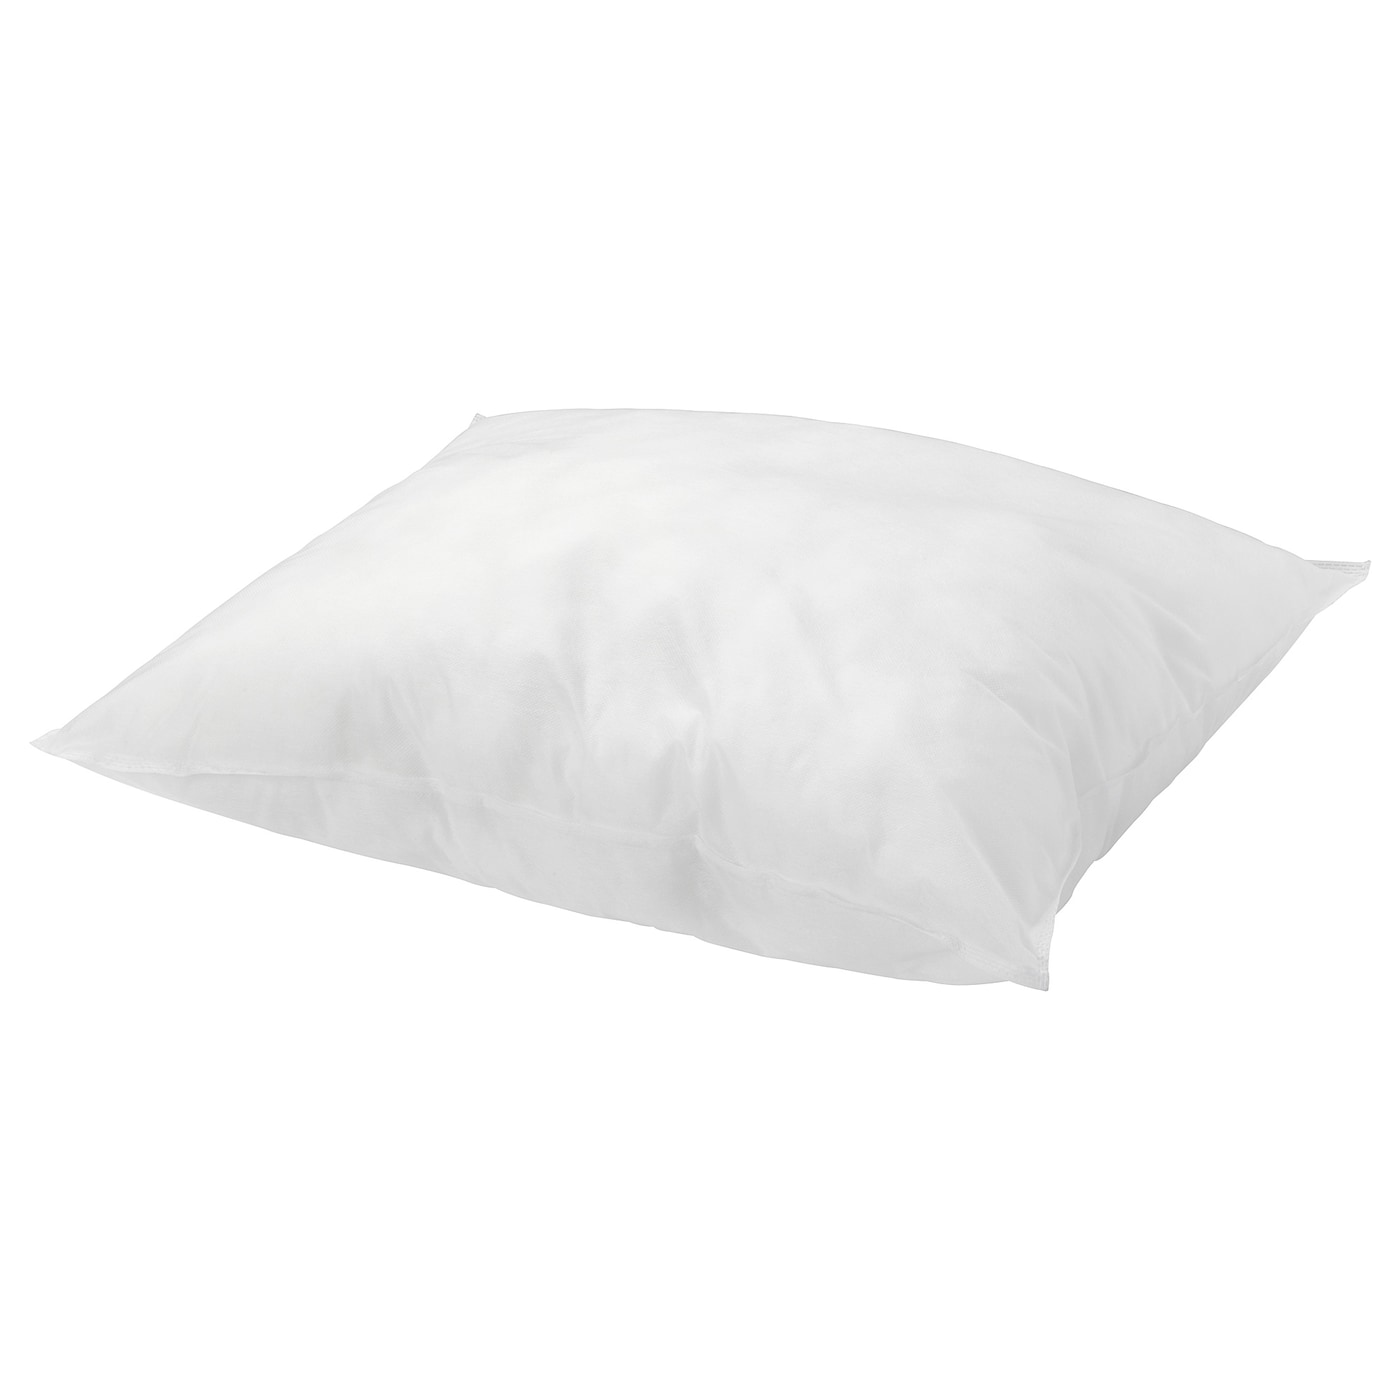 pillows from ikea